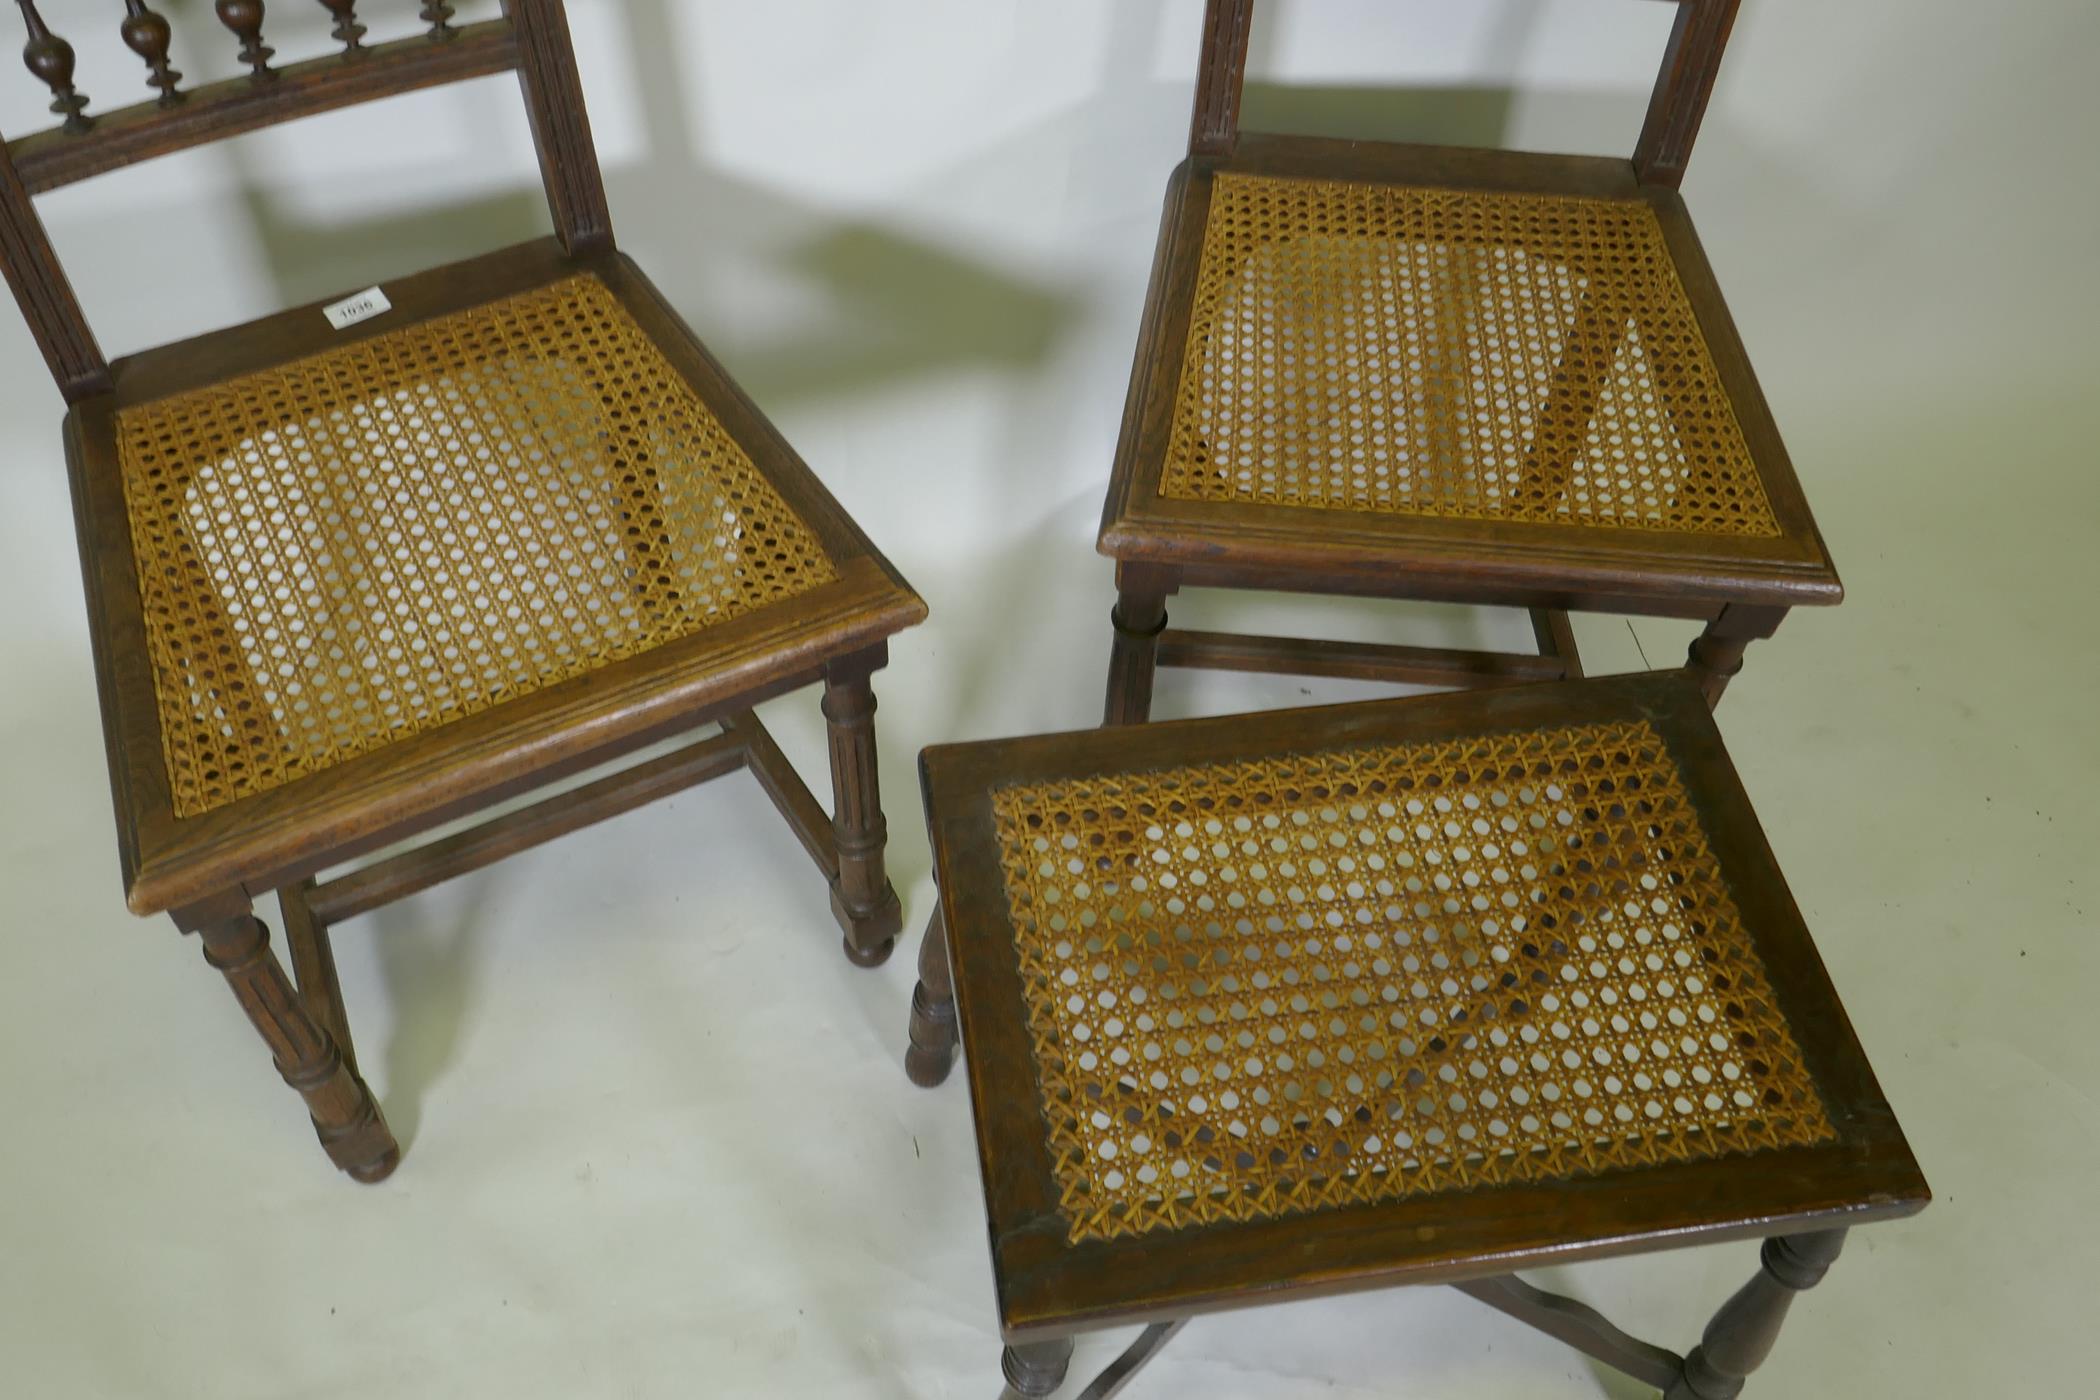 A pair of C19th French oak side chairs with cane seats and backs, and a stool - Image 3 of 3